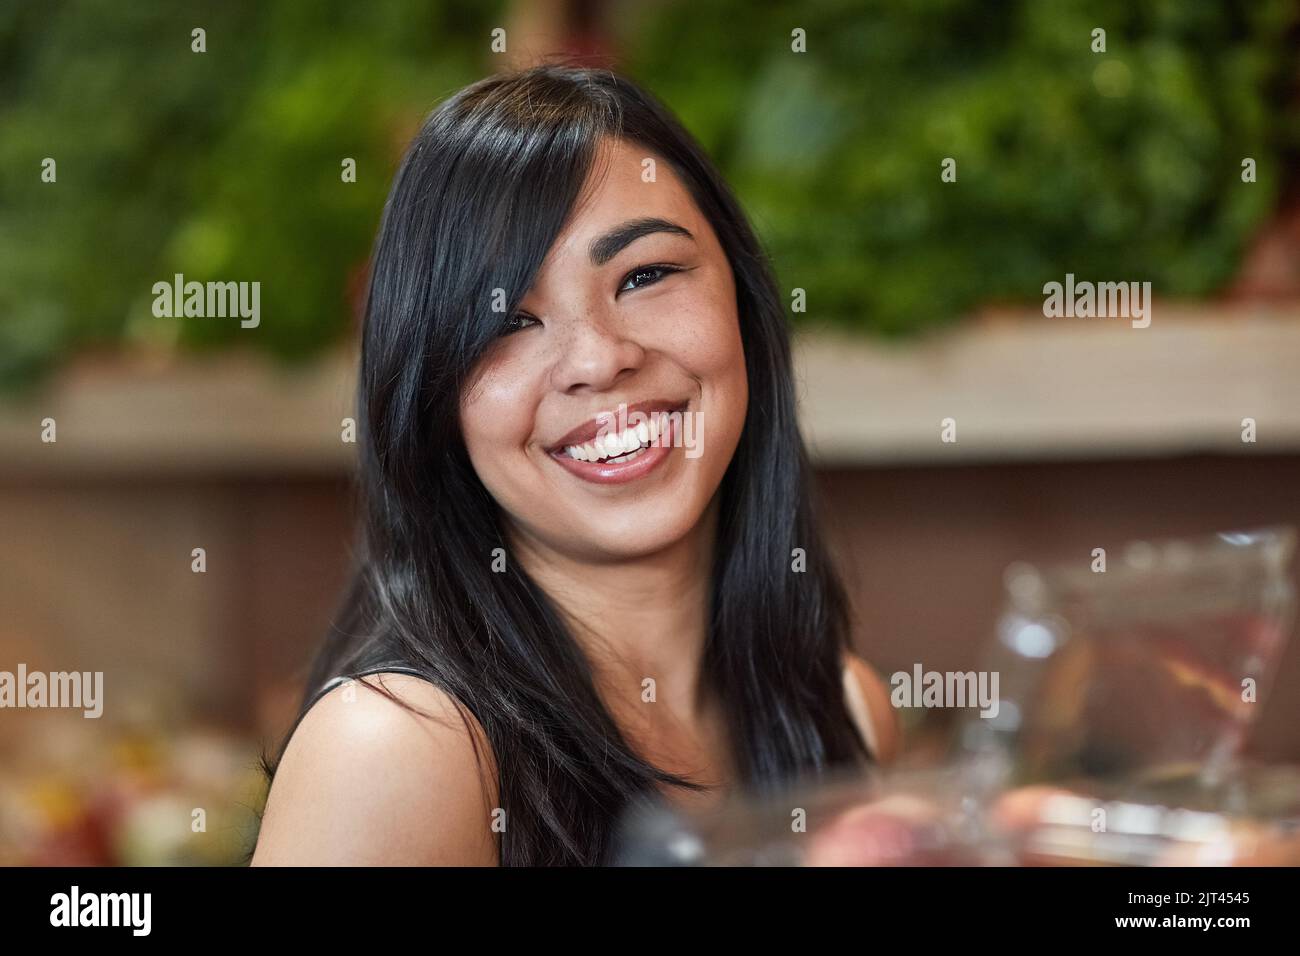 Out for my weekly grocery shop. Portrait of an attractive young woman shopping in a grocery store. Stock Photo